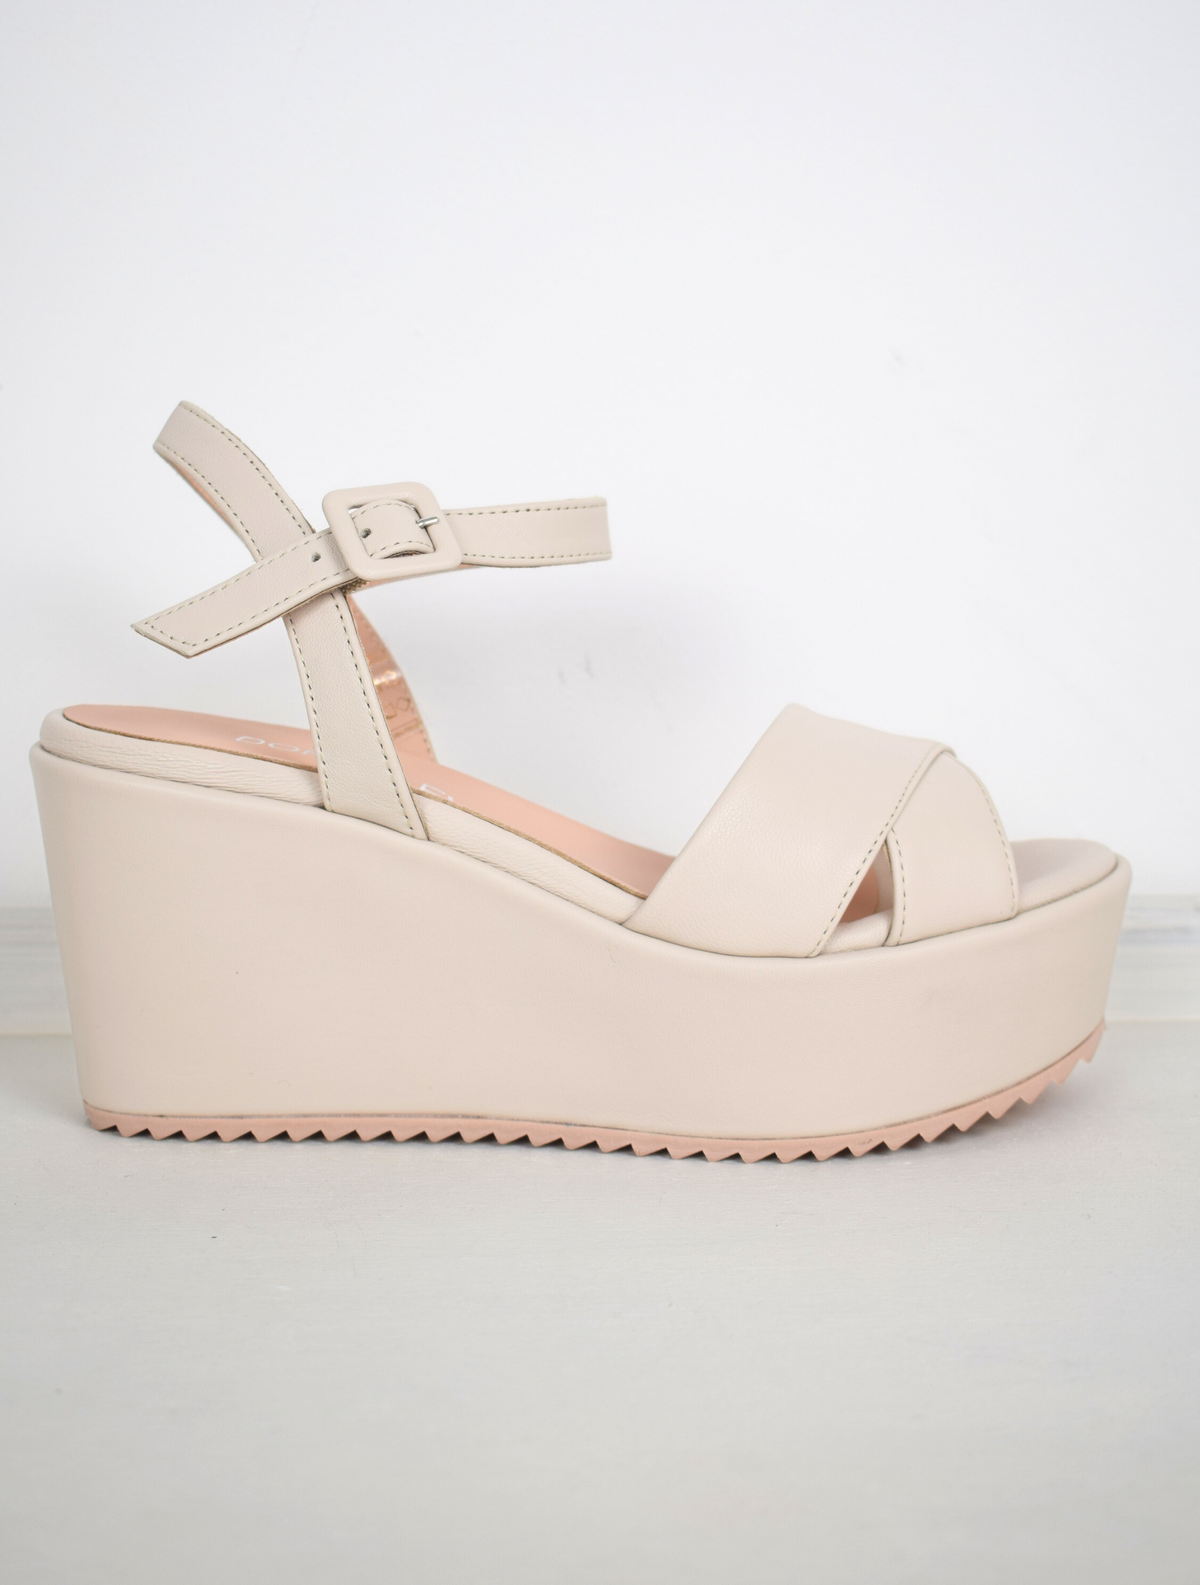 A flat pale pink sandal with large platform and ankle strap 